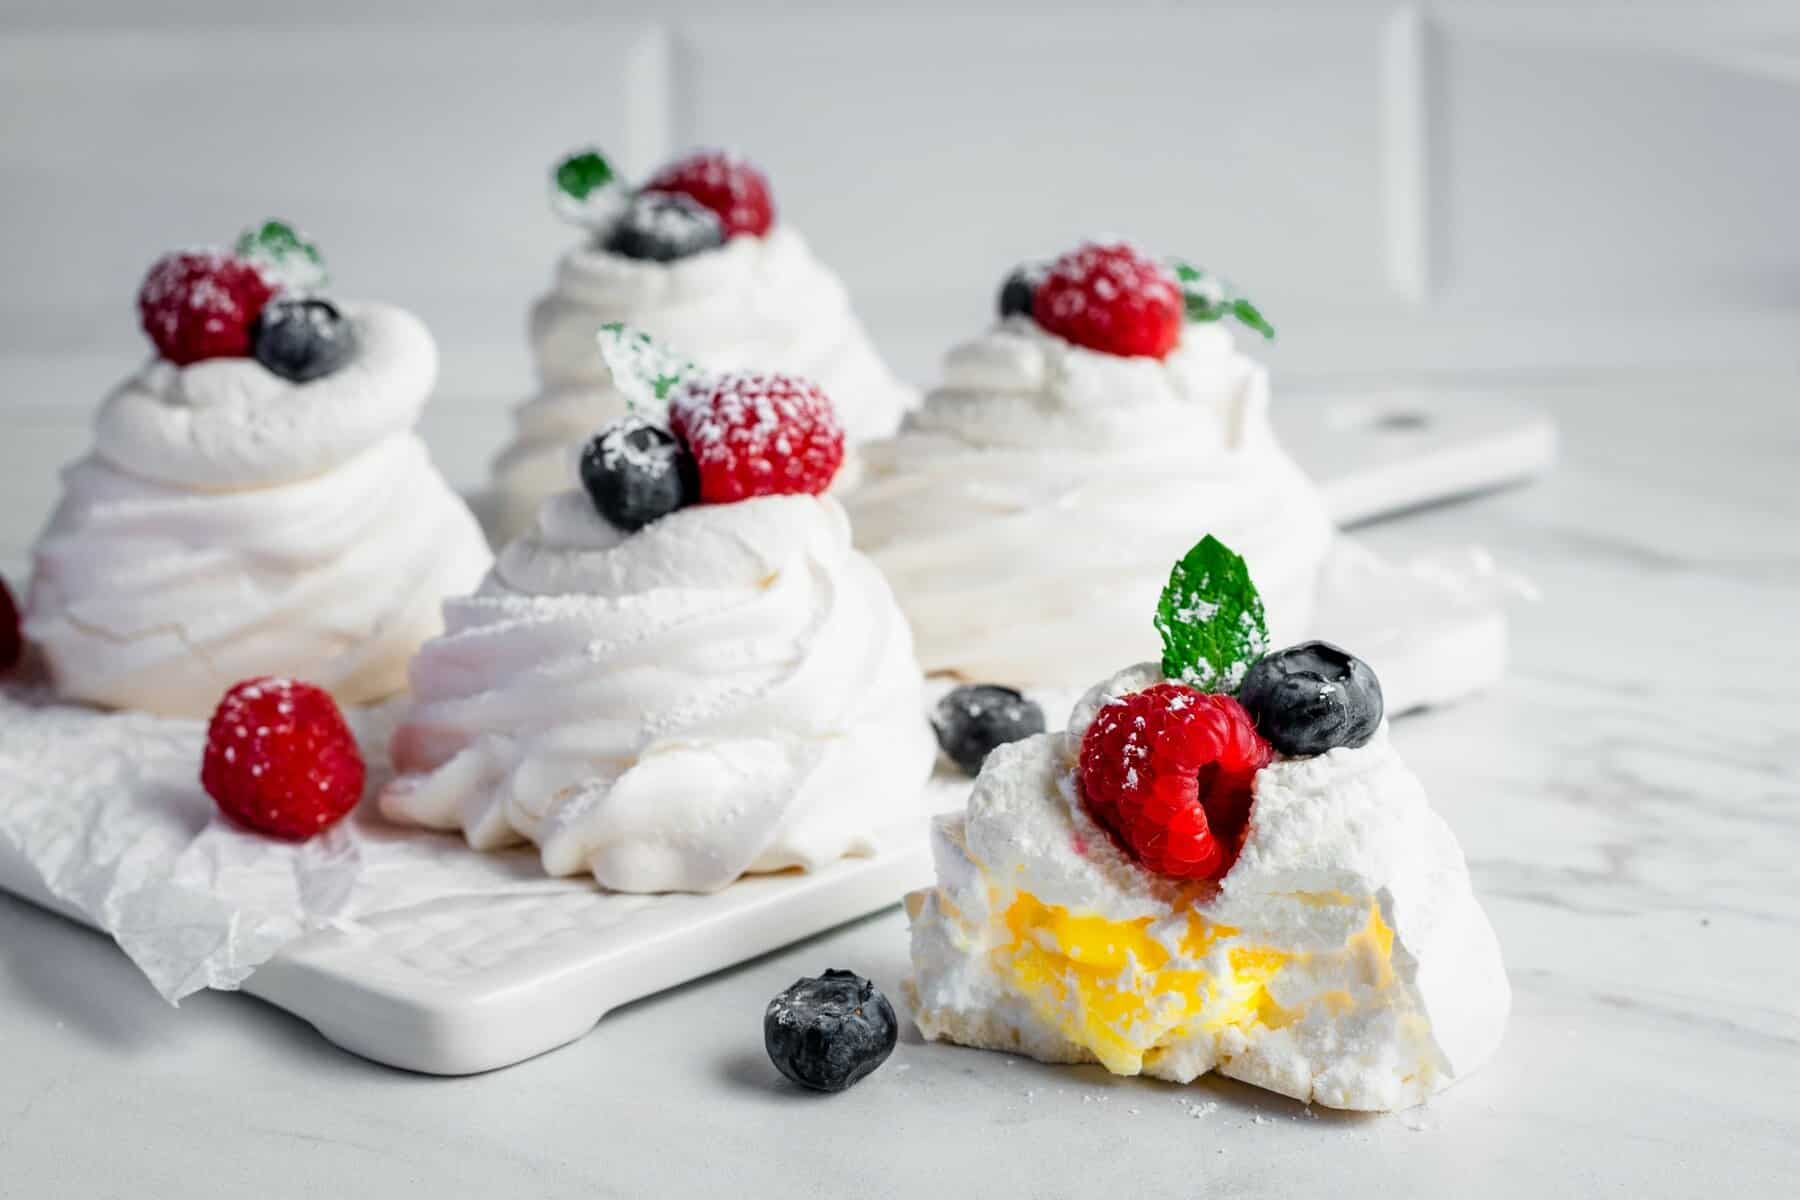 A straight view of several mini pavlovas with lemon curd and berries placed on a white platter.